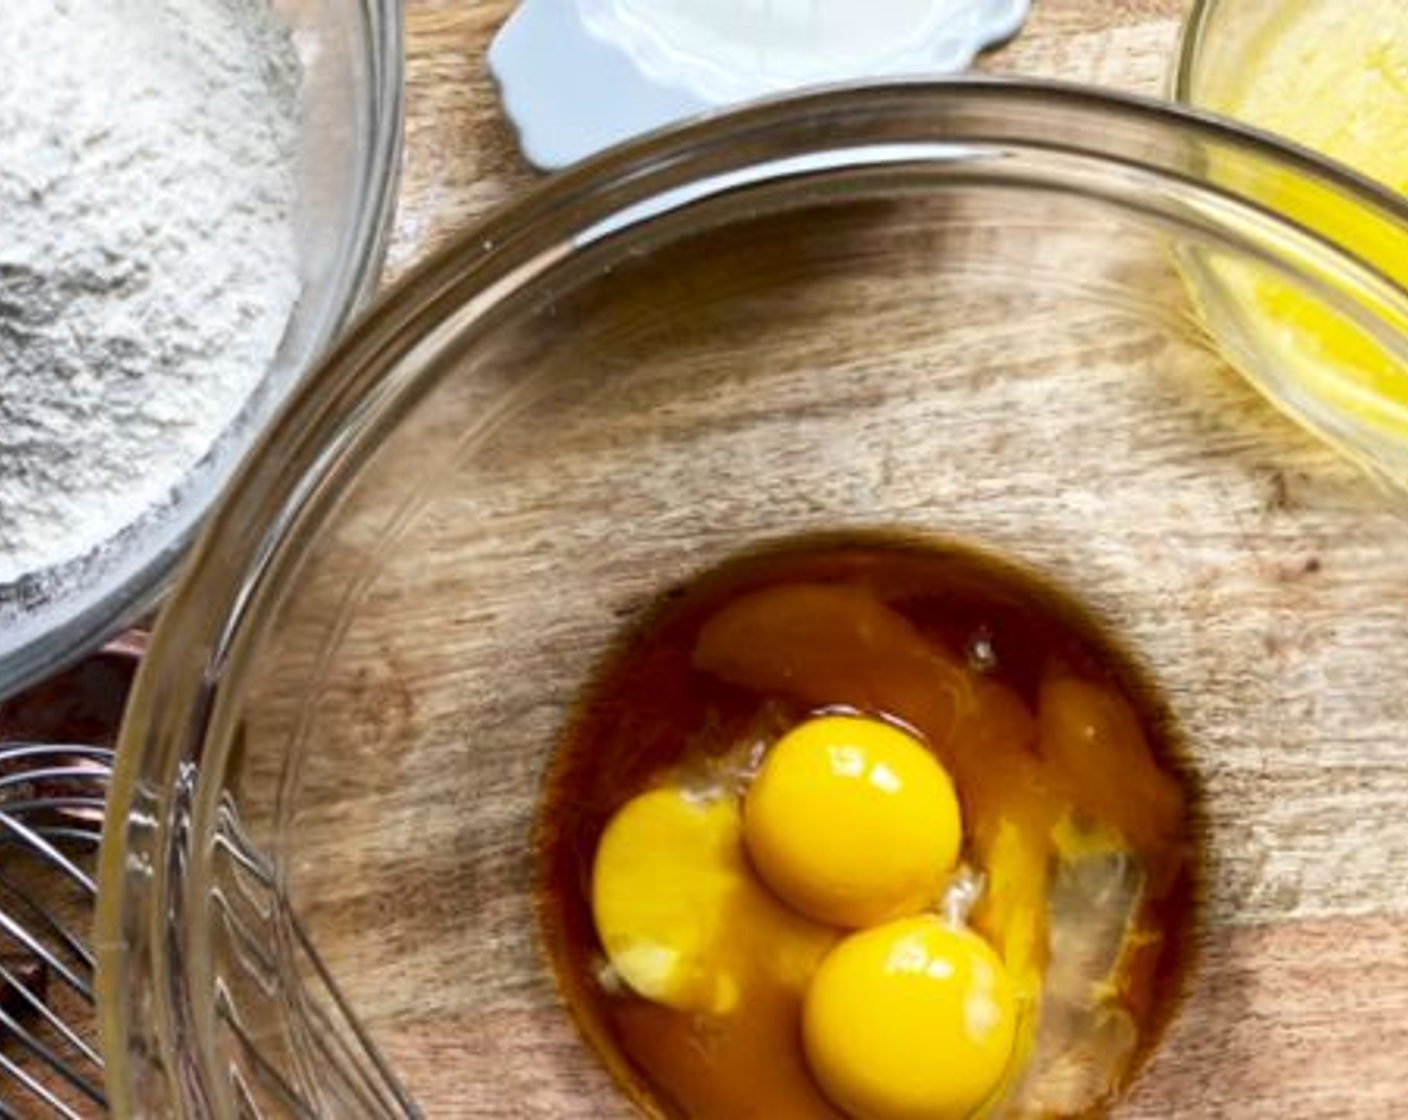 step 2 Put the yolks of the Eggs (3), Milk (1 cup), Unsalted Butter (1/4 cup), and Pure Vanilla Extract (1/2 Tbsp) into another bowl and beat well.